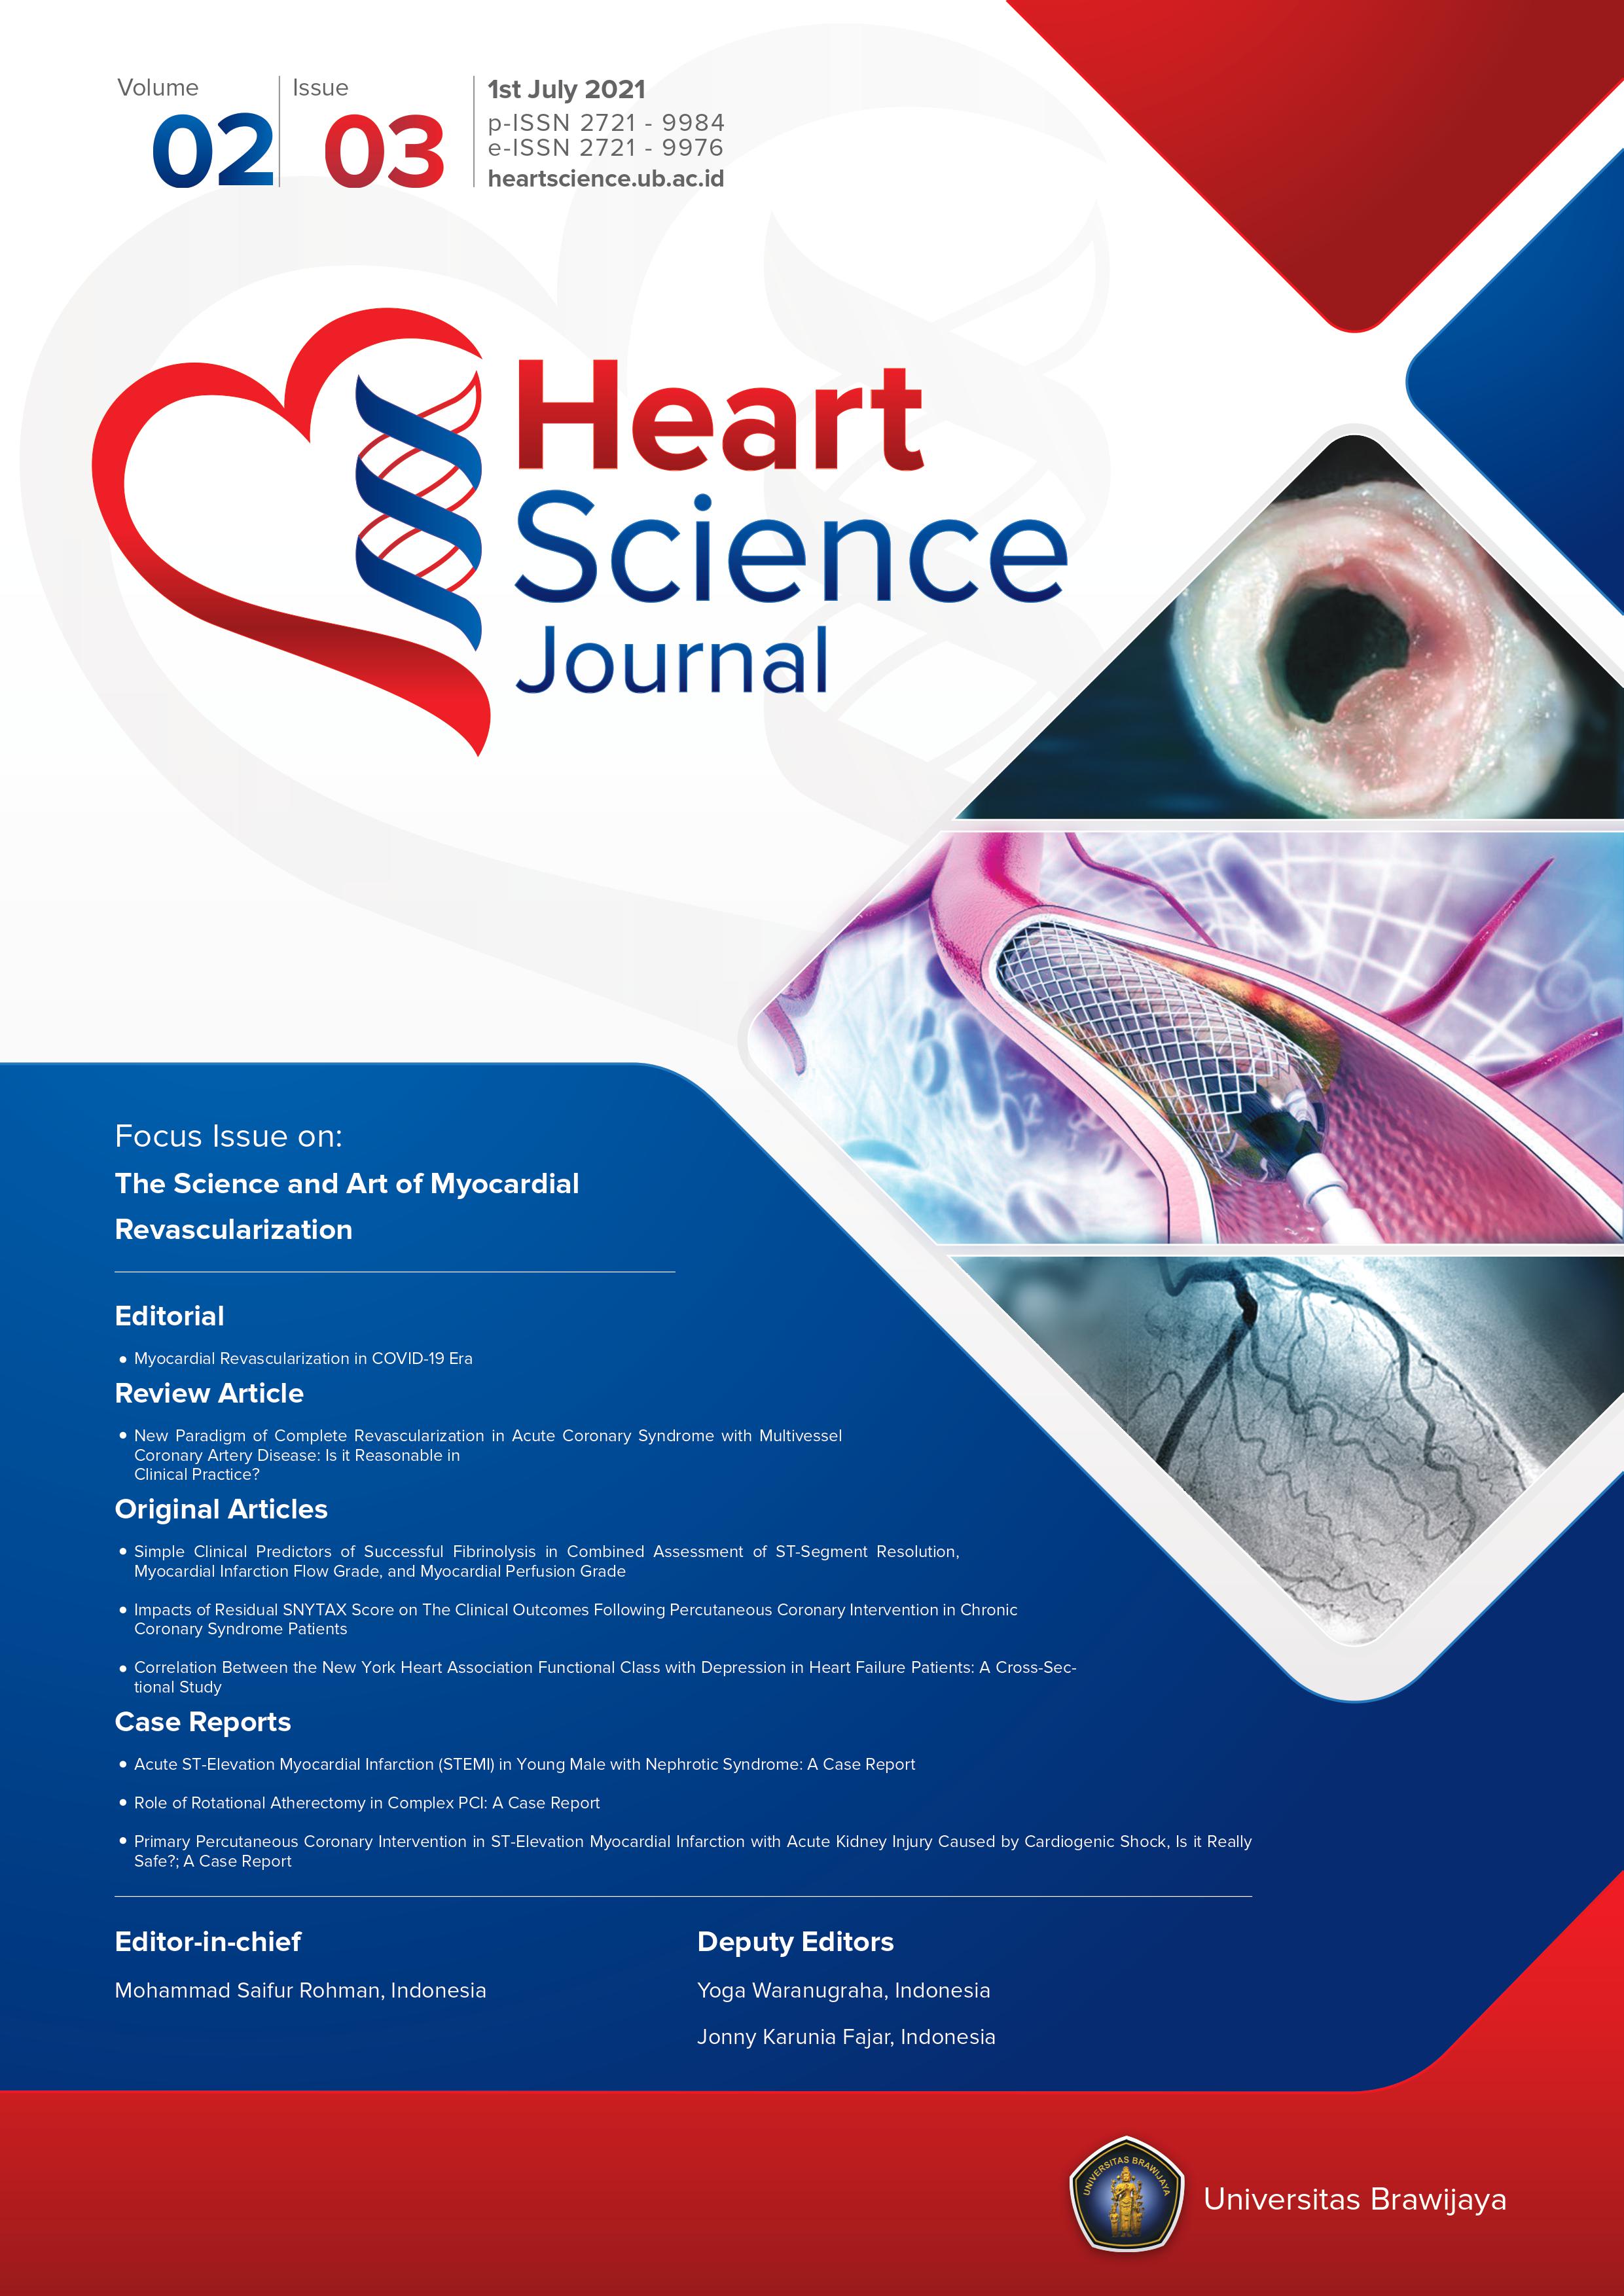 Responders vs Non-responders to Cardiac Resynchronization Therapy: A Review Article | Zulkifli ...